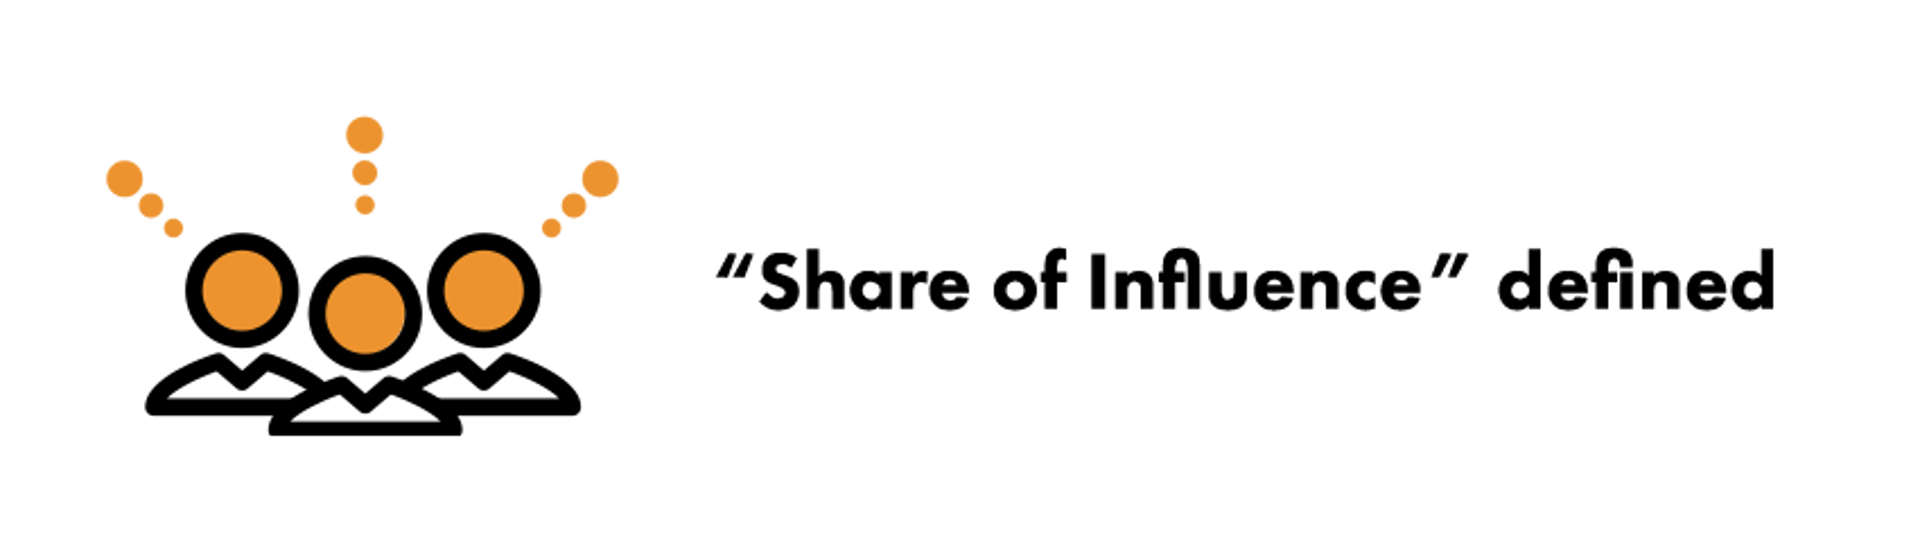 Share of Influence Defined